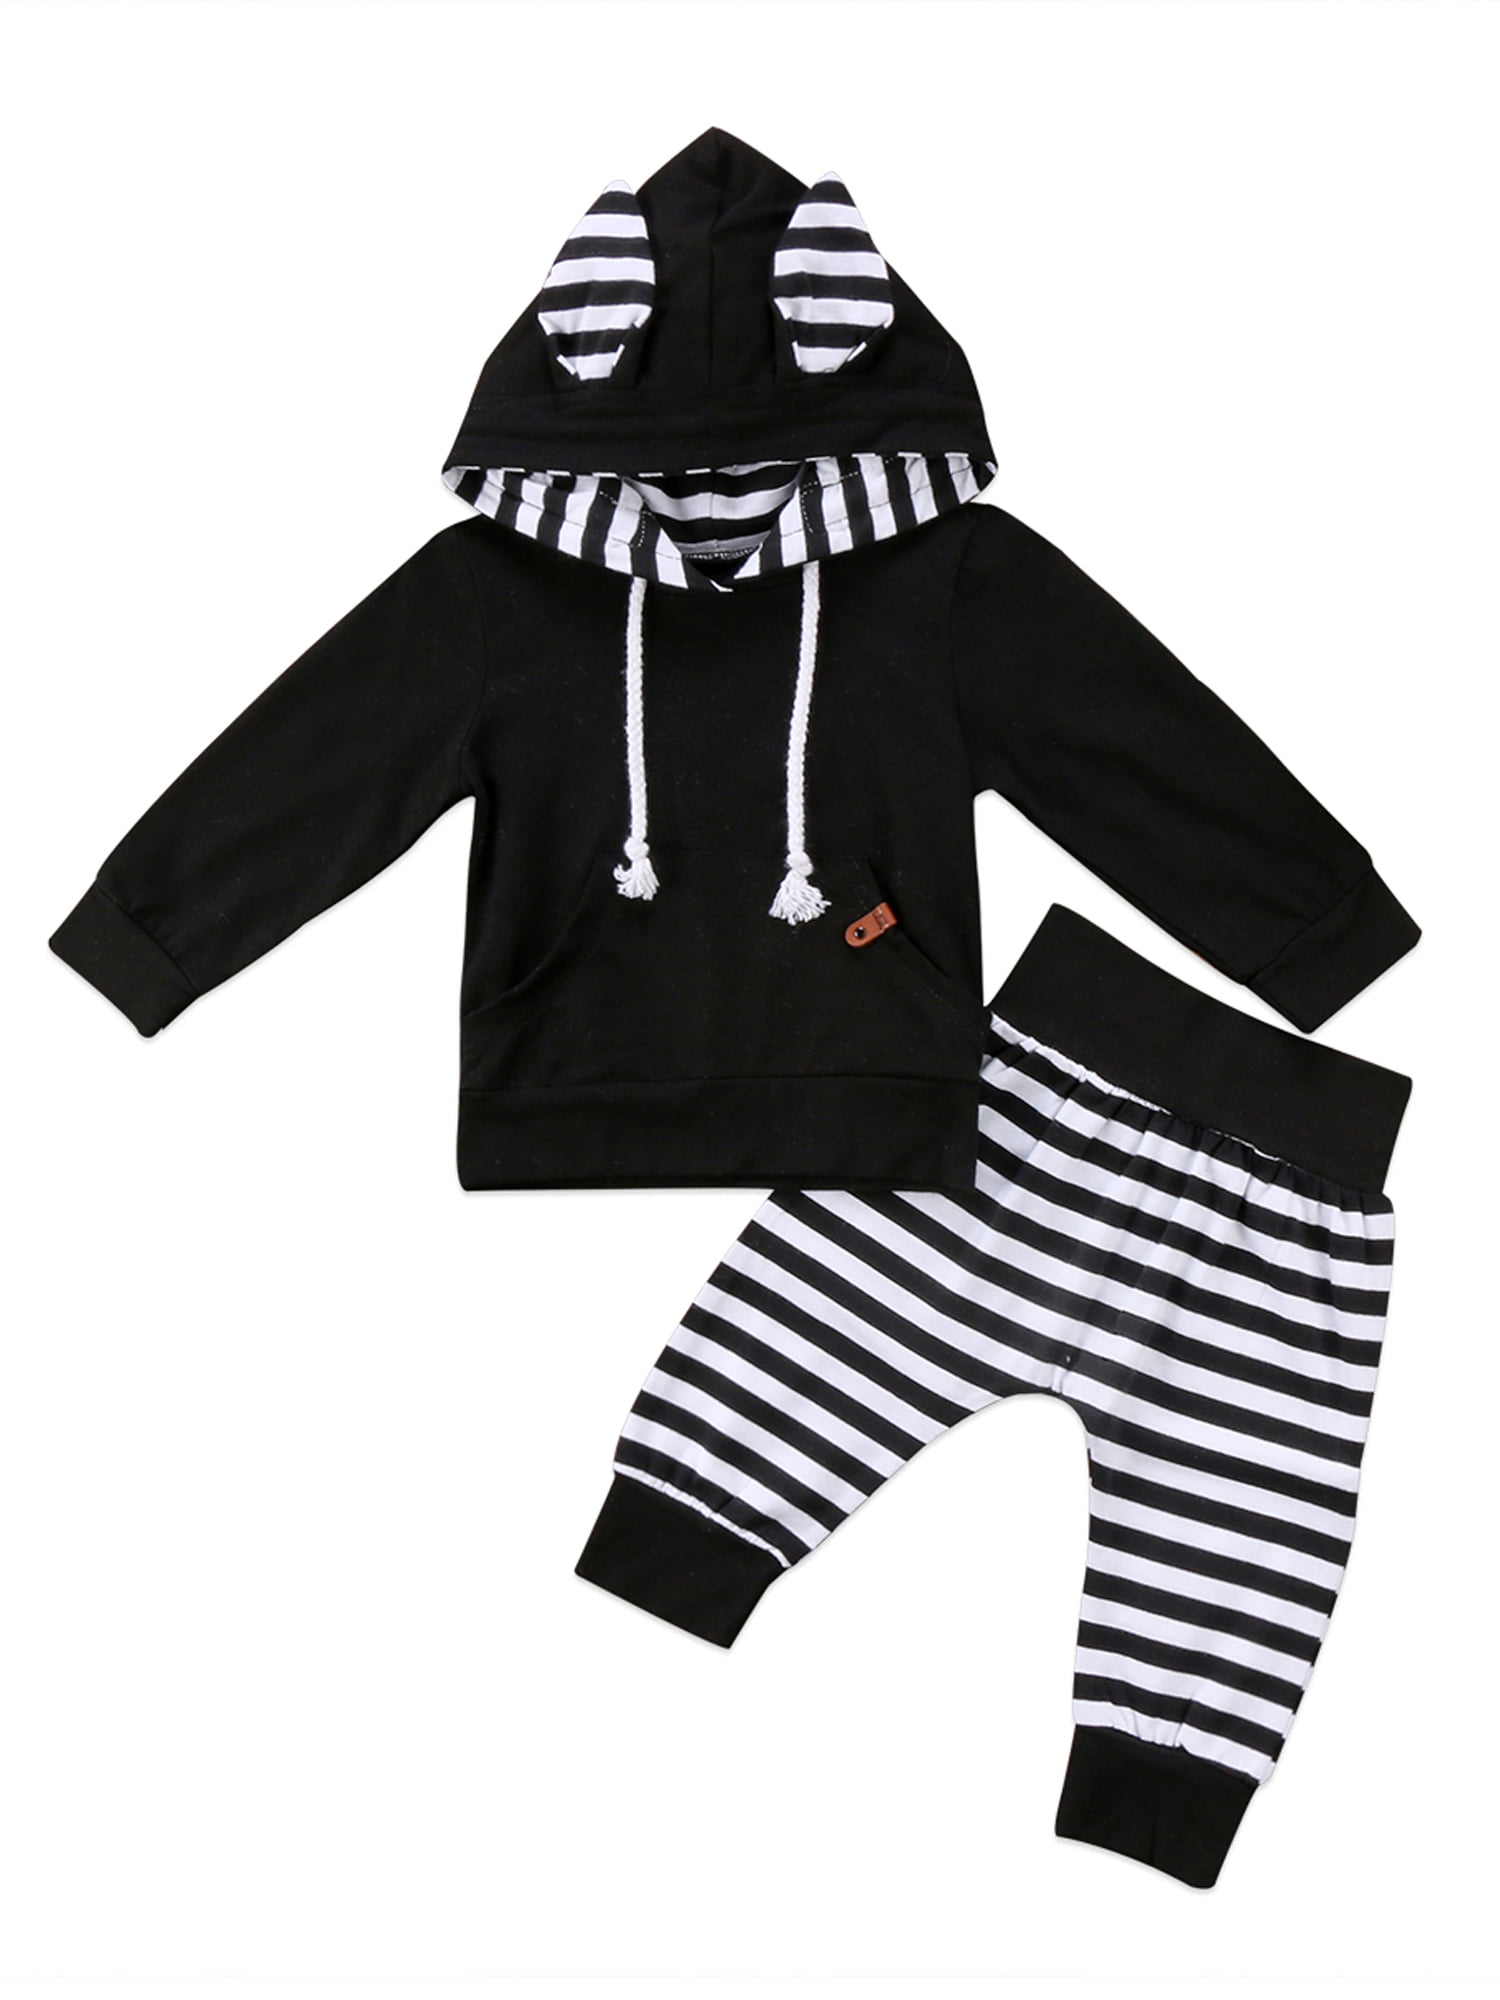 2pcs Toddler Kids Baby Boys Tops Hoodie T-shirt Shorts Pants Outfit Clothes Set 